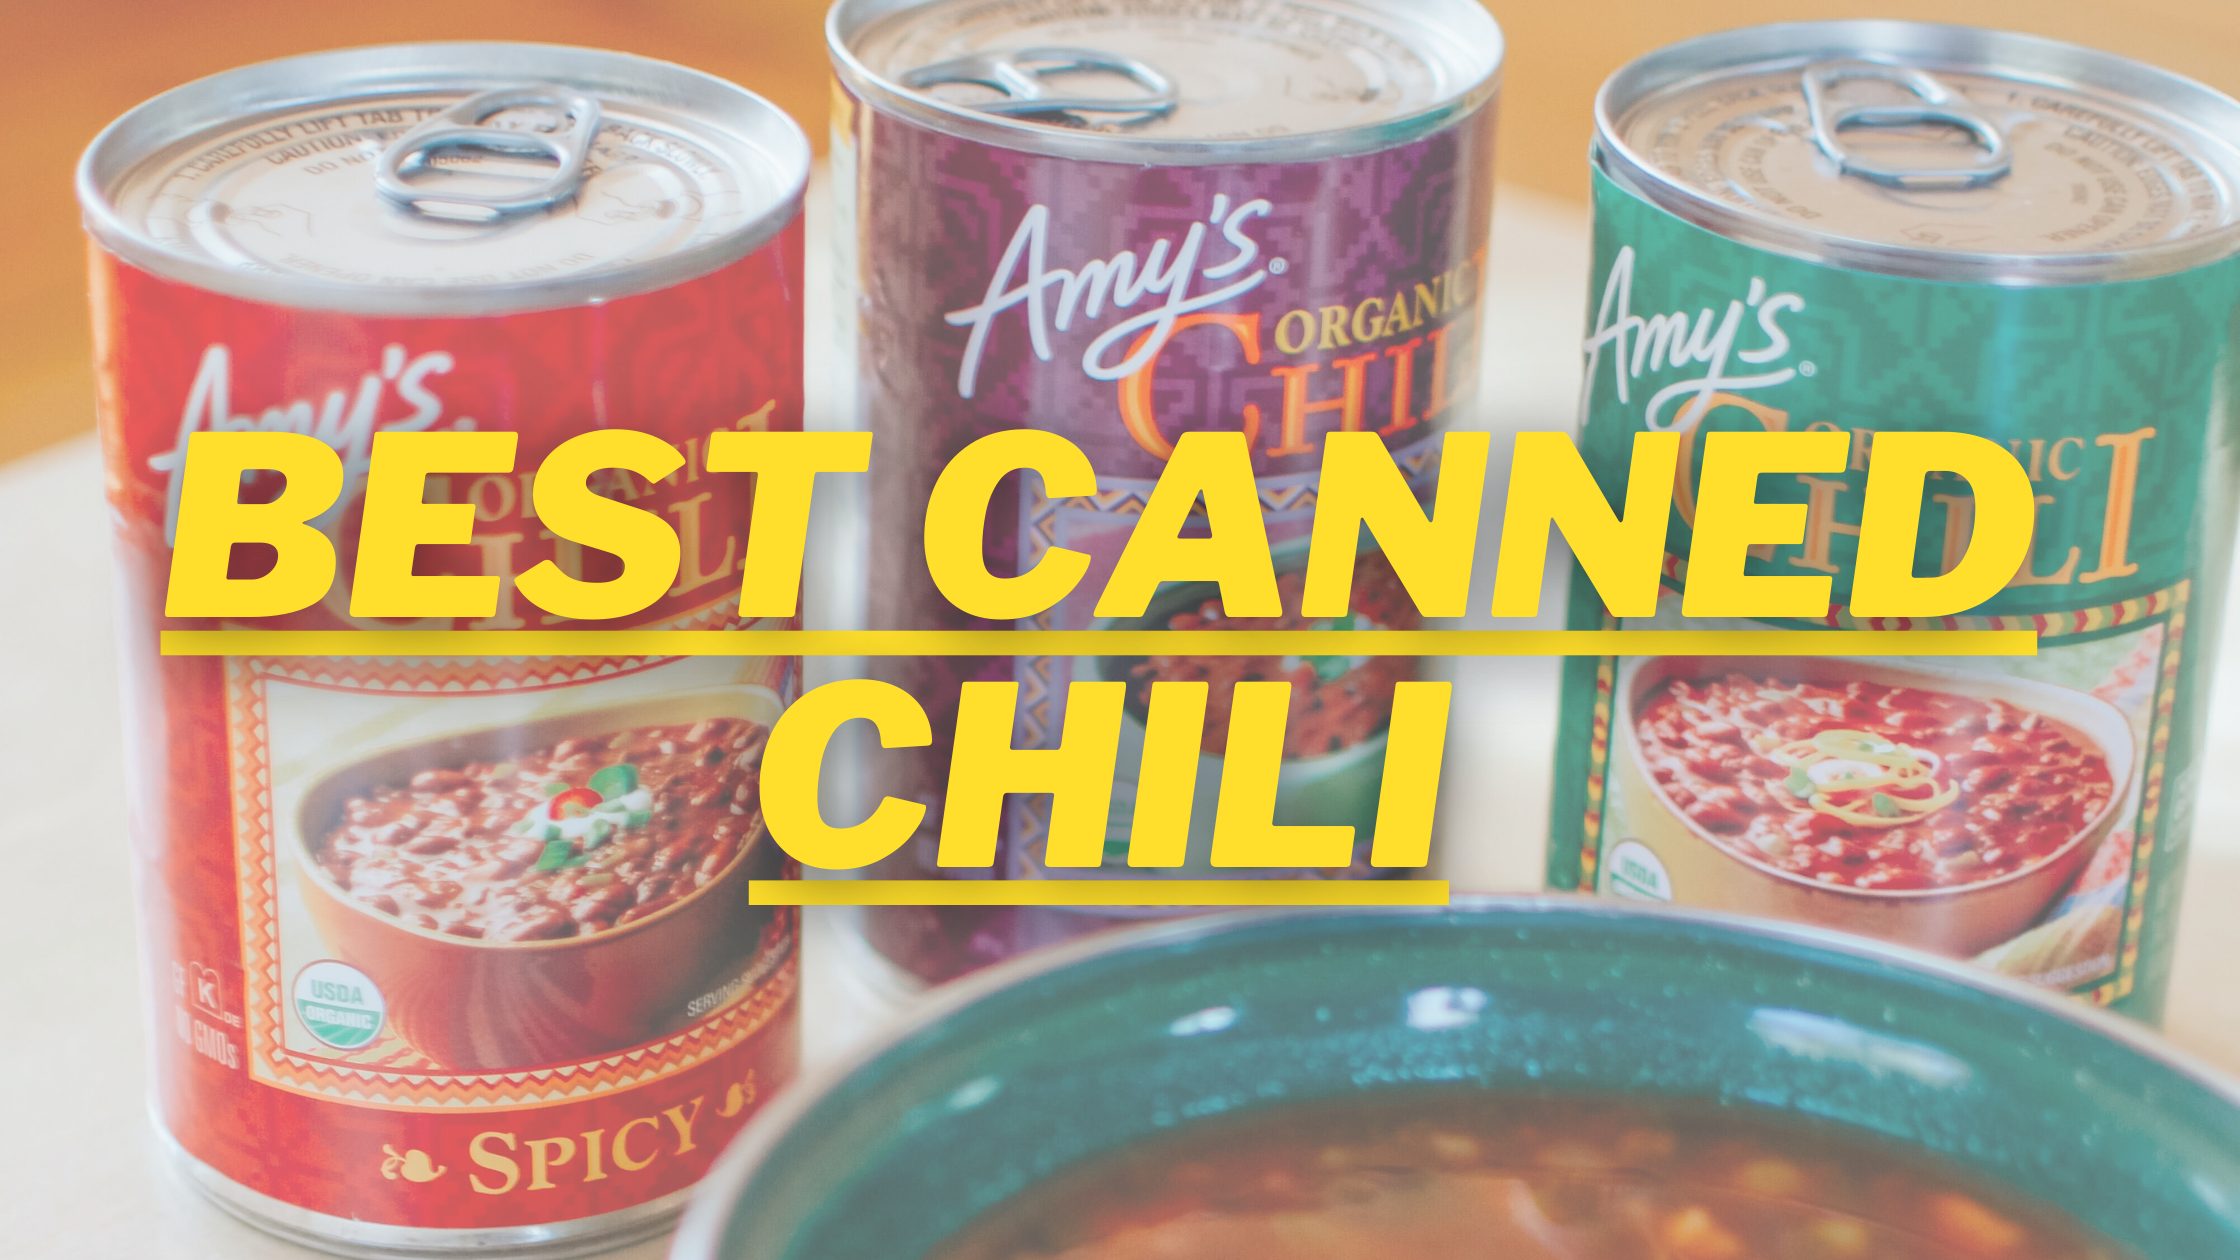 10 Best Canned Chili To Buy On Amazon To Make Your Food Spicy 2021